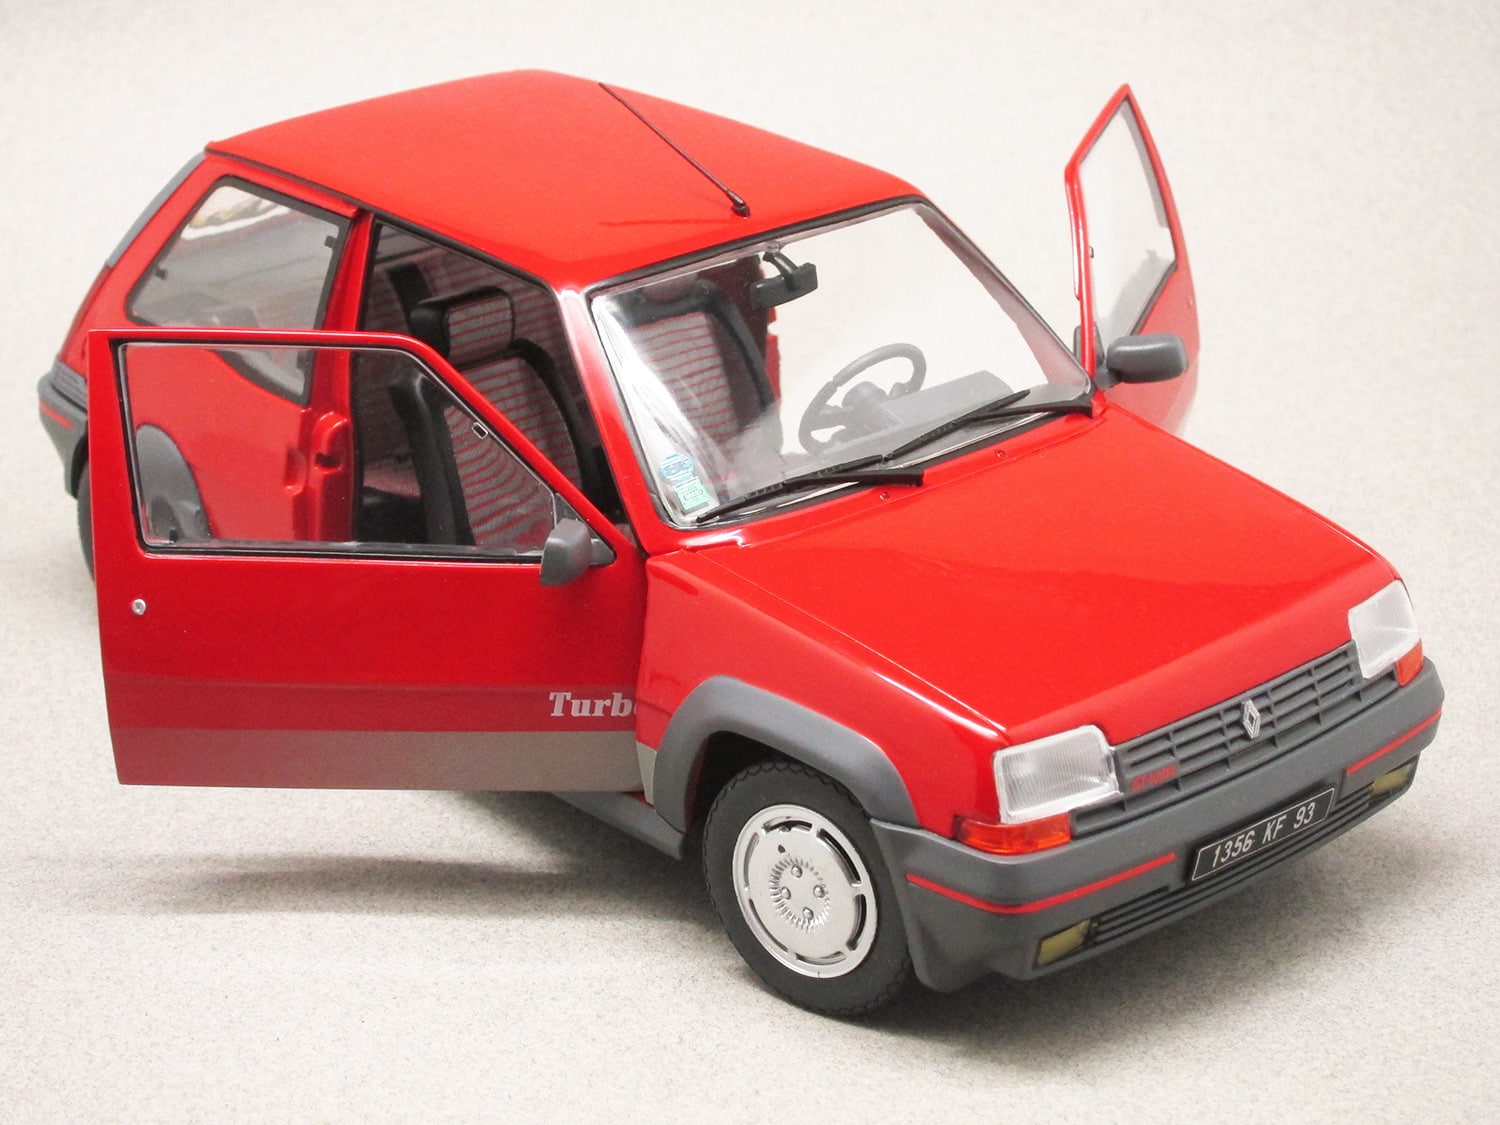 Renault 5 GT Turbo rouge 1985 (Solido) 1/18e